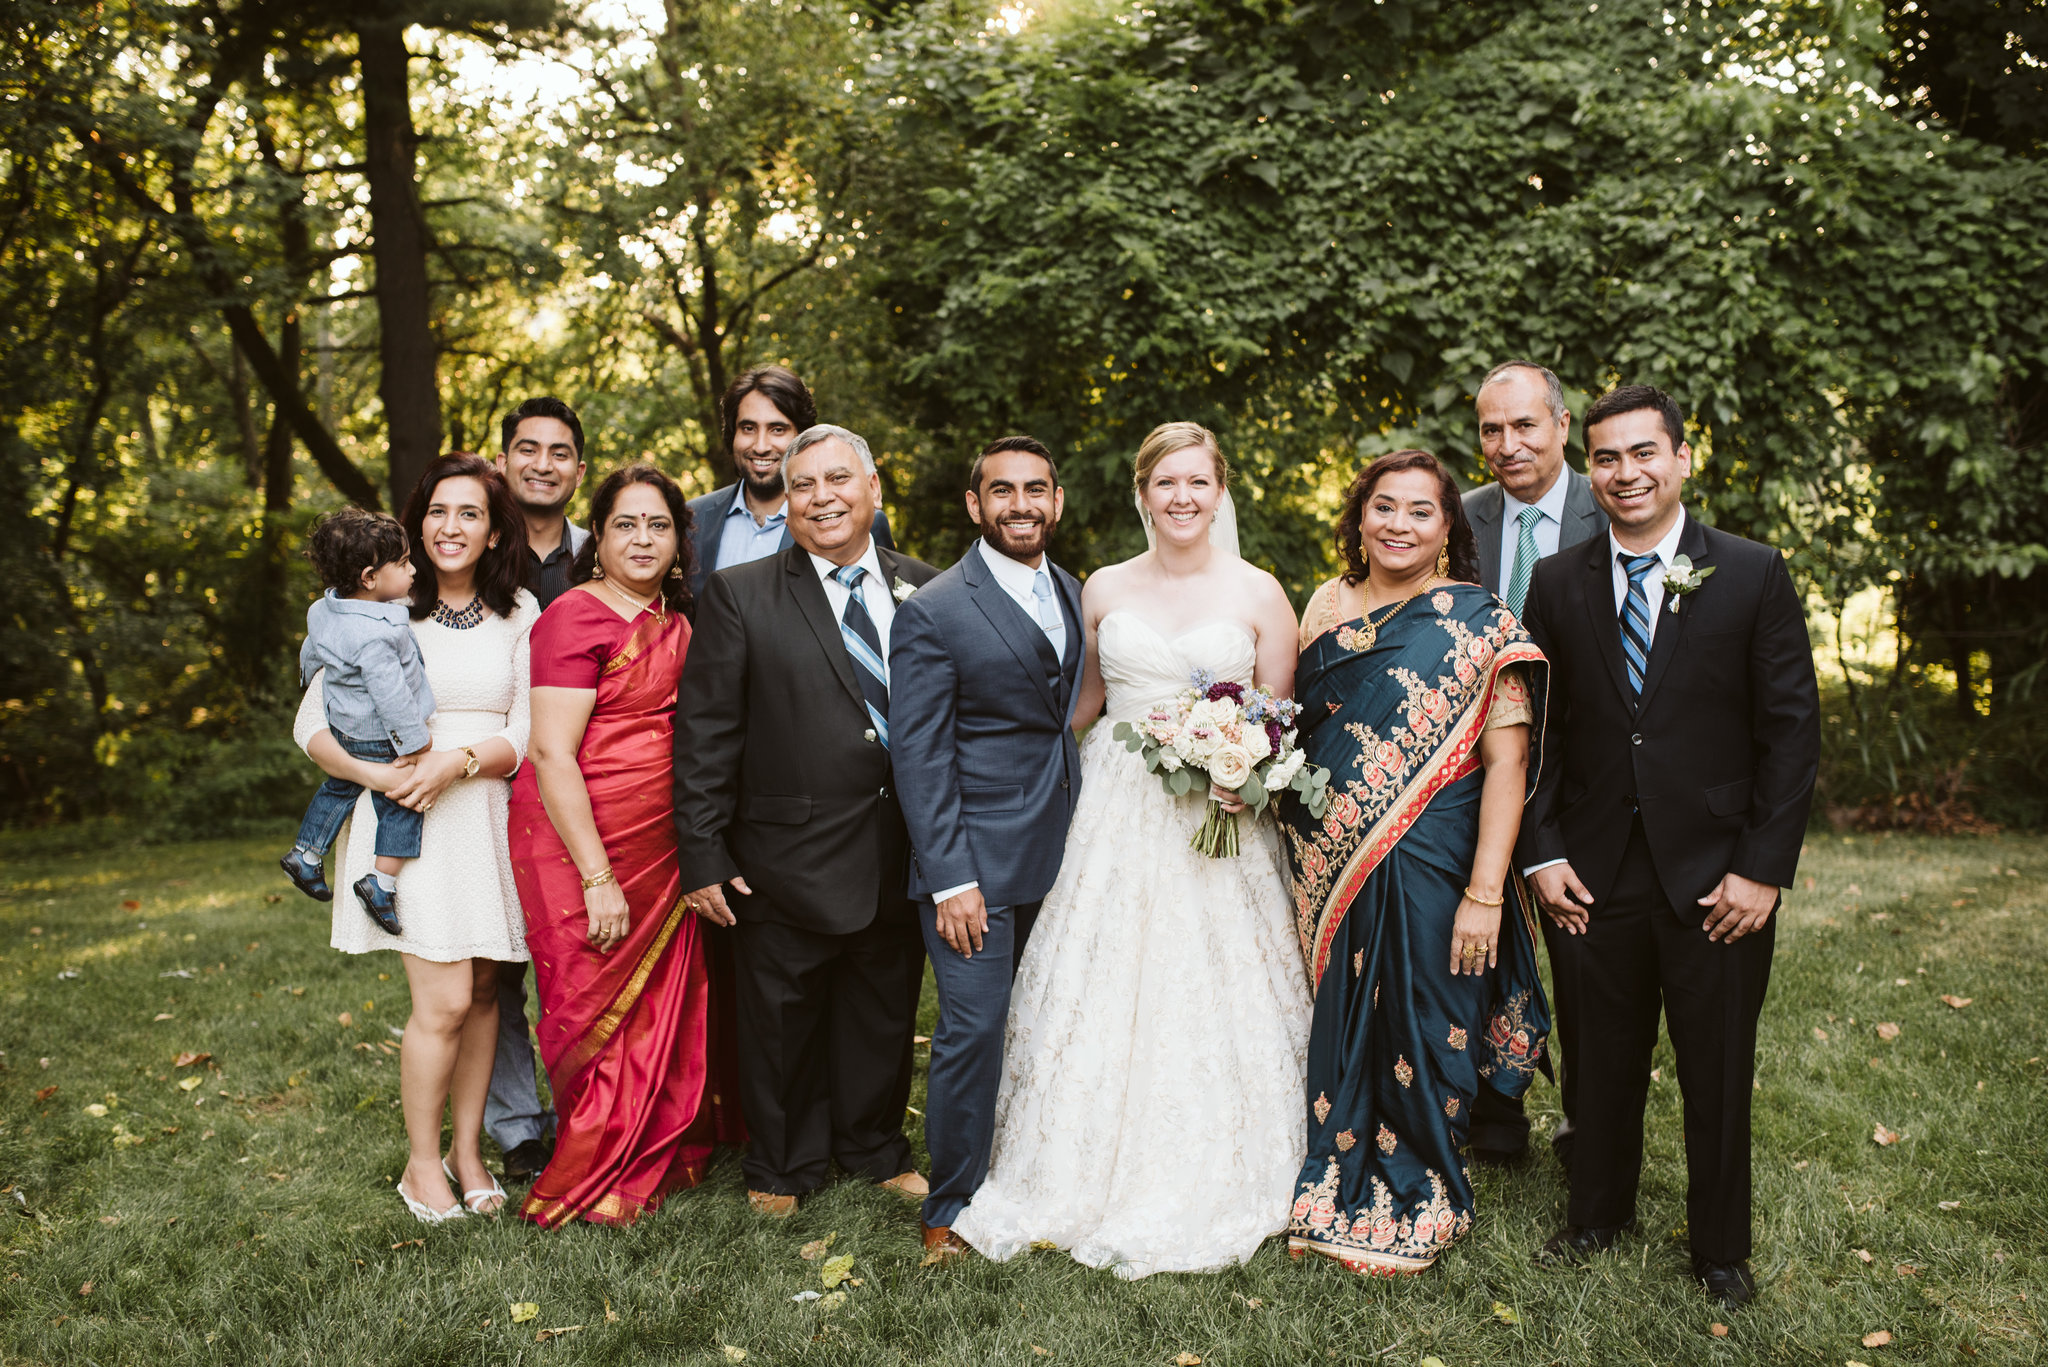  Ellicott City, Baltimore Wedding Photographer, Wayside Inn, Summer Wedding, Romantic, Traditional, Portrait of Bride and Groom with Family 